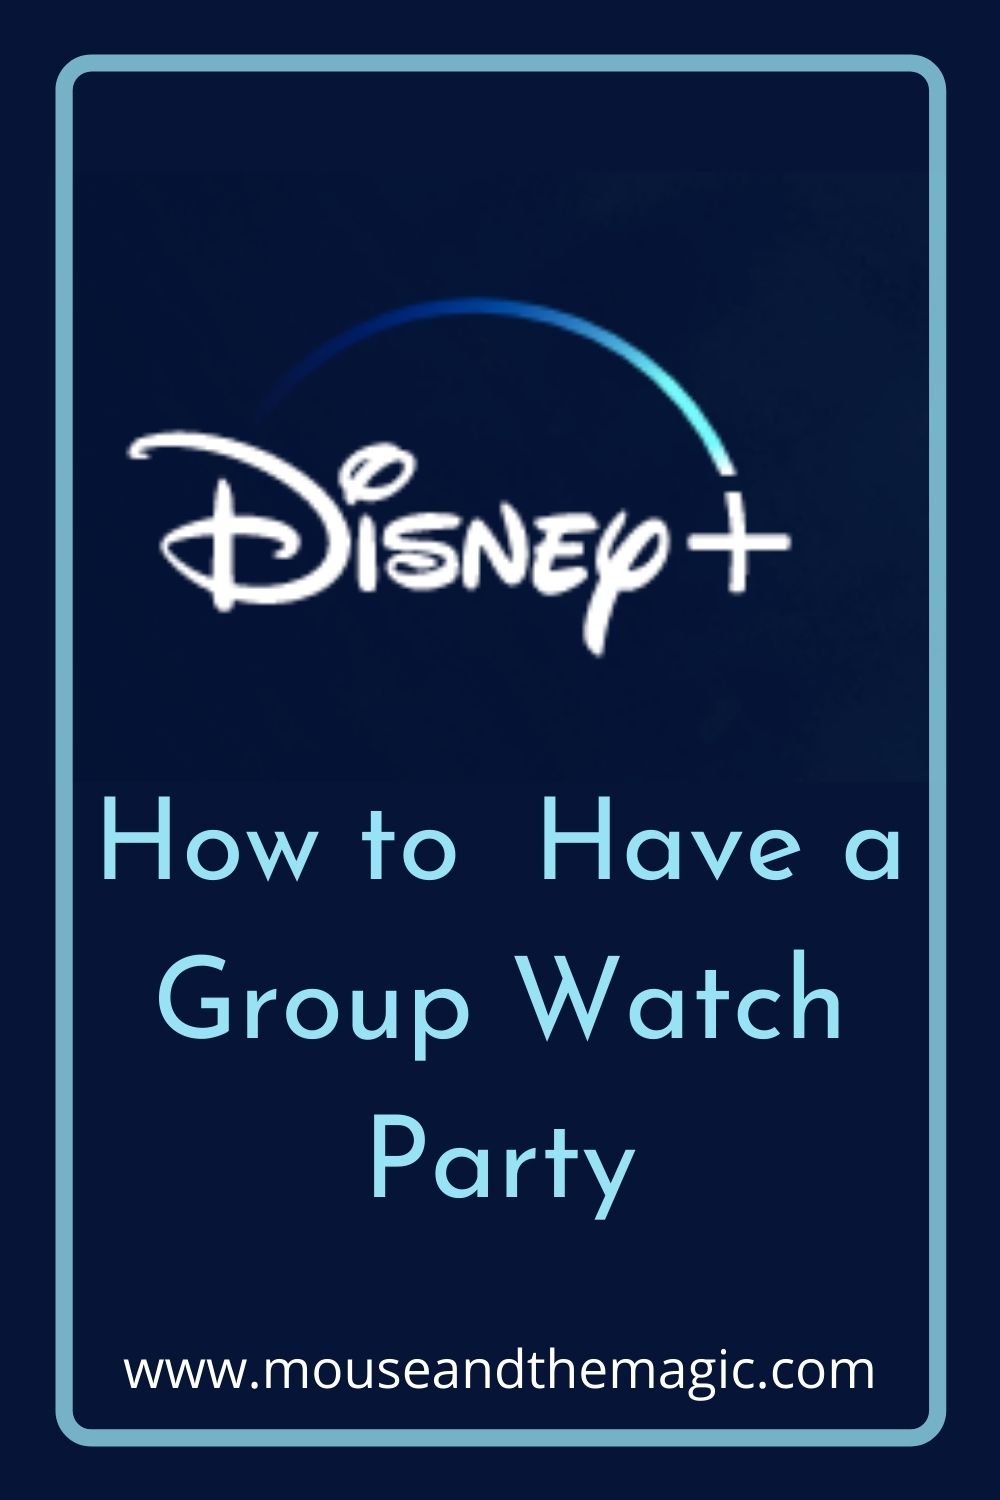 Disney Plus - How to Host a Group Watch Party